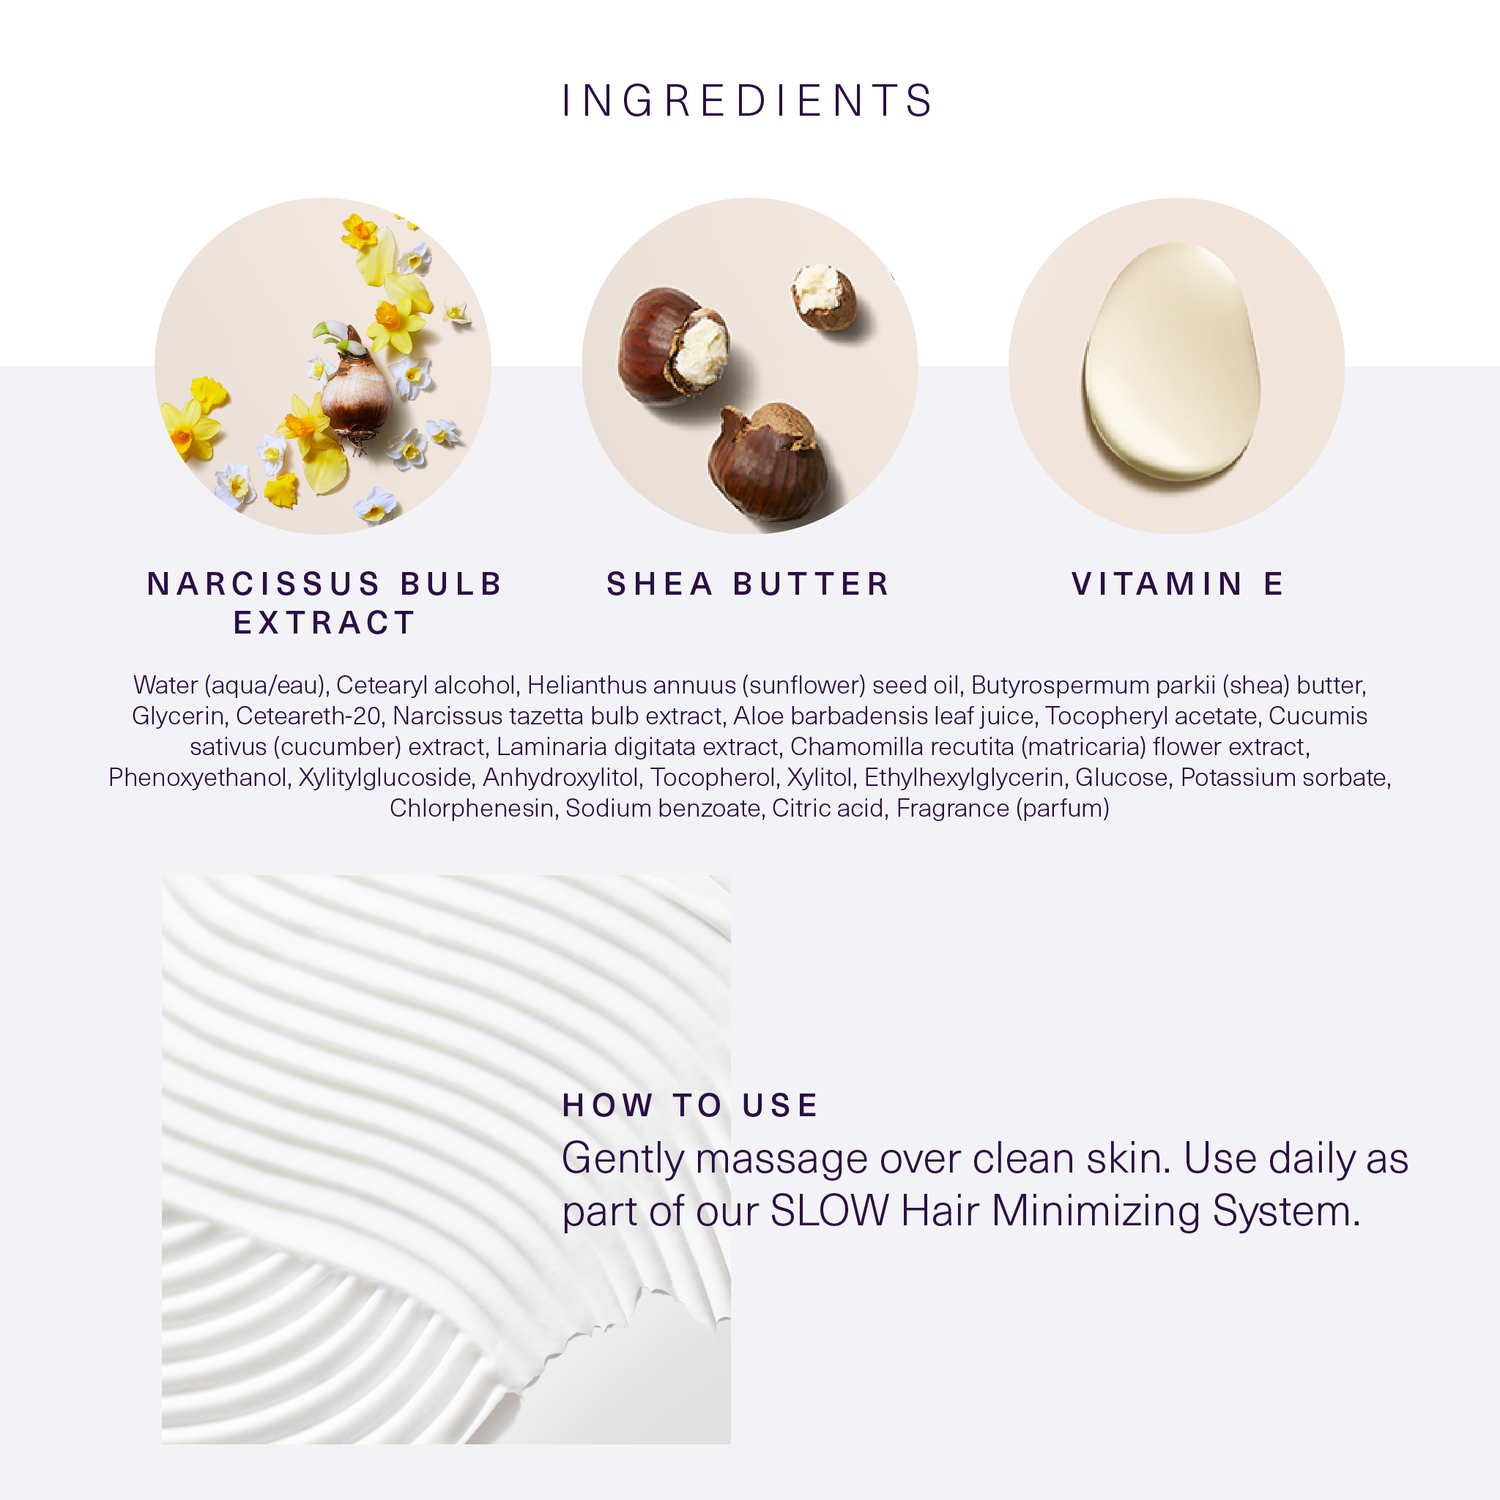 European Wax Center infographic of ingredients and how to use Shea Body Butter with images of narcissus bulb extract, shea butter, and vitamin e on white and light purple background